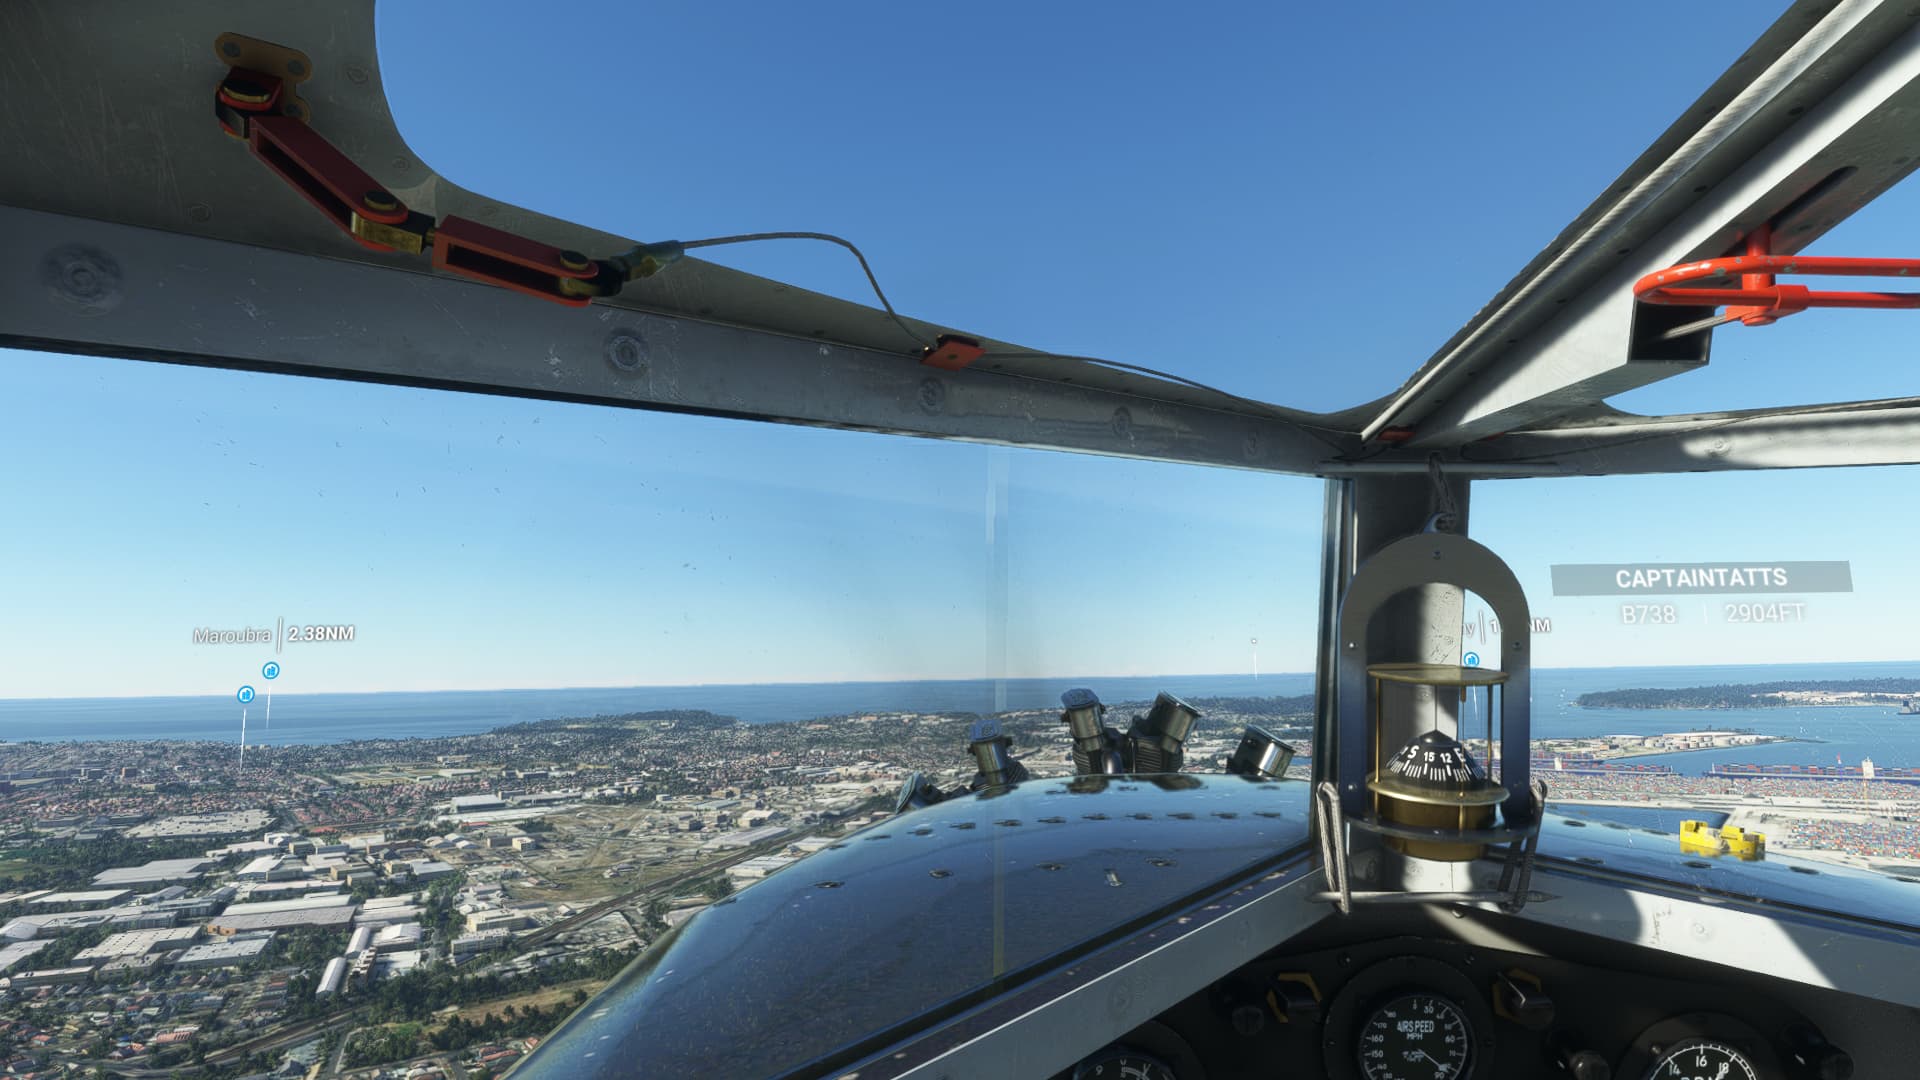 Microsoft Flight Simulator ✈️ on X: New updates to the Ford 4-AT Trimotor,  Latécoère 631, and Boeing 307 Stratoliner are now available from Content  Manager. You can see the release notes for